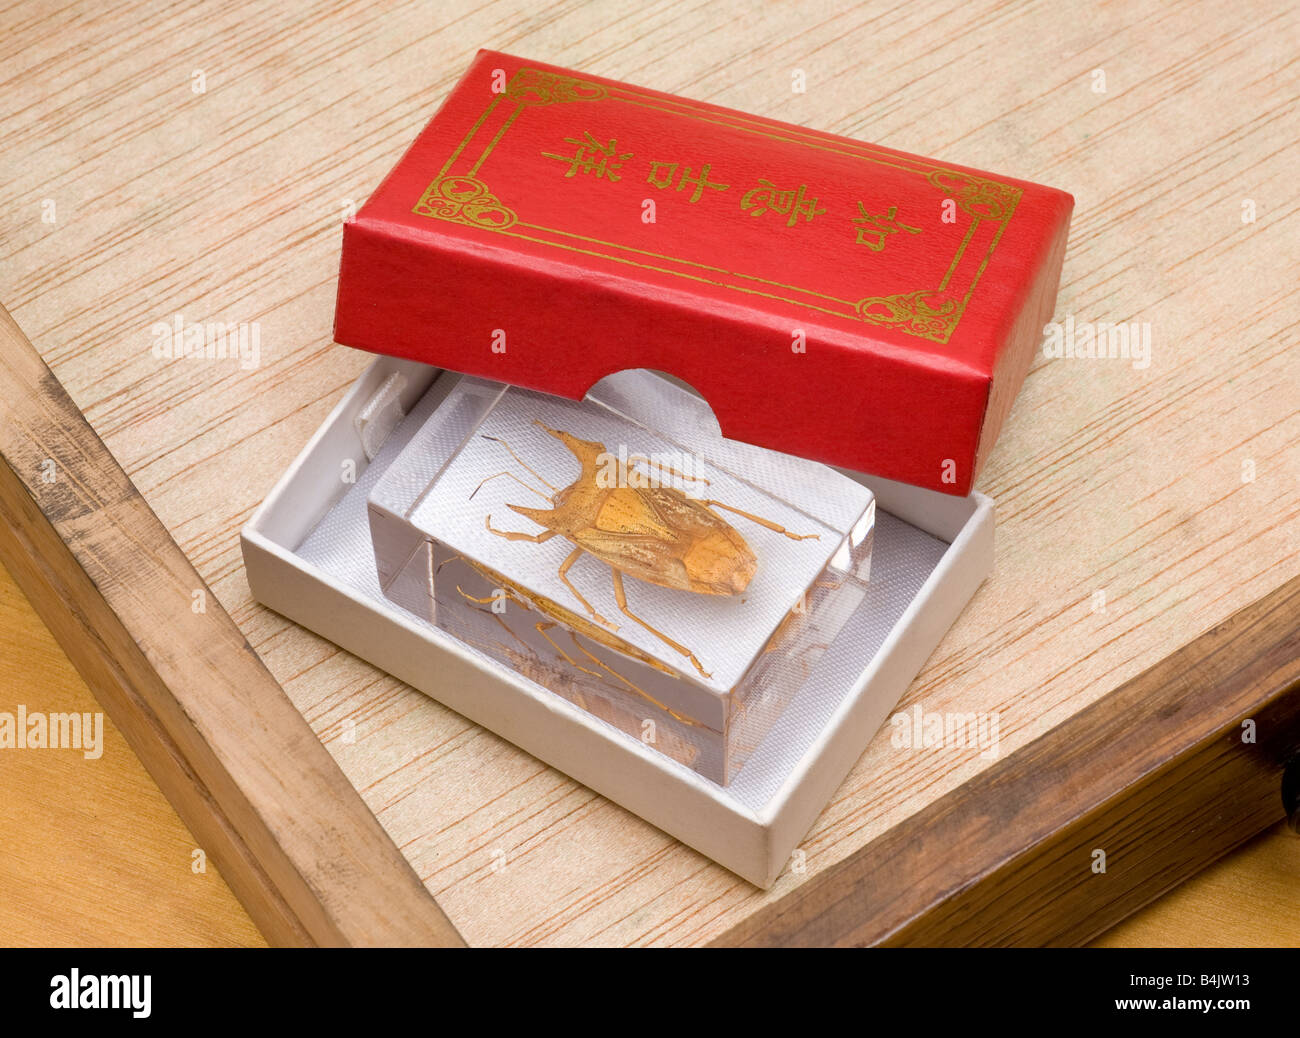 Golden Stink Bug, Cressona divaricata, lucite resin embedded, shield bug from China Stock Photo